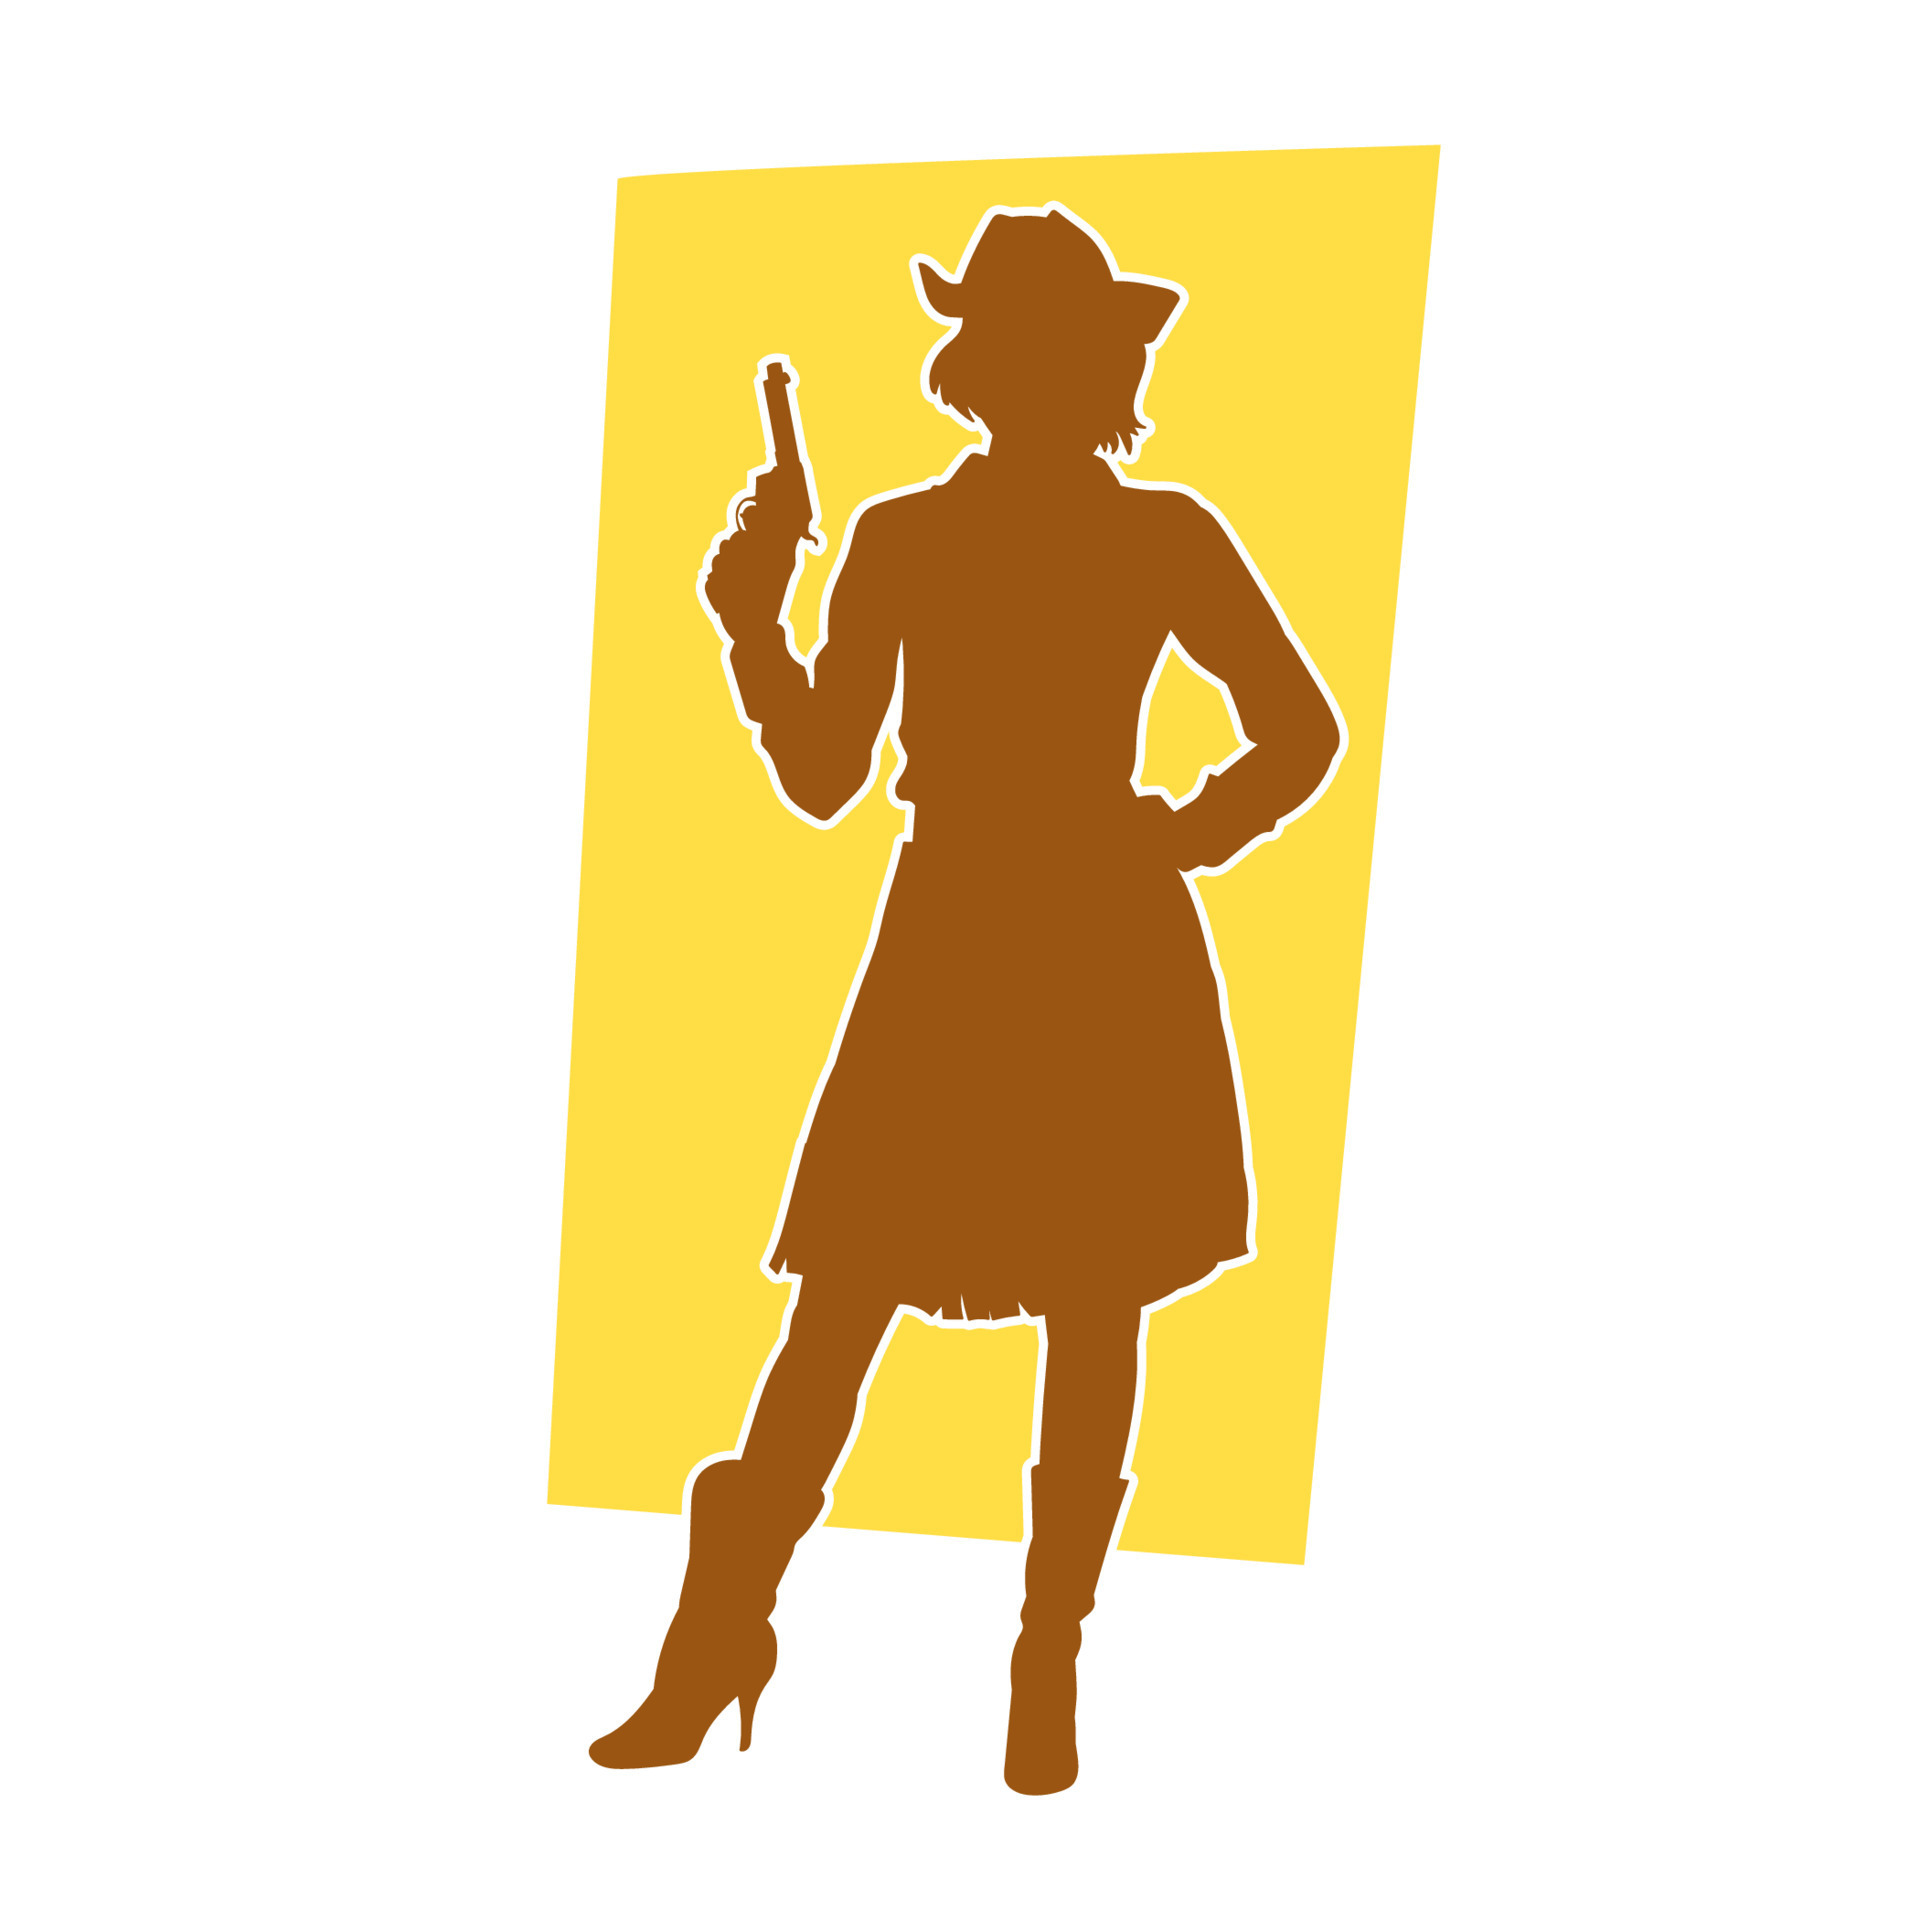 Silhouette Of A Slim Sexy Woman Pose In Cowgirl Or Country Girl Costume Carrying Pistol Hand Gun